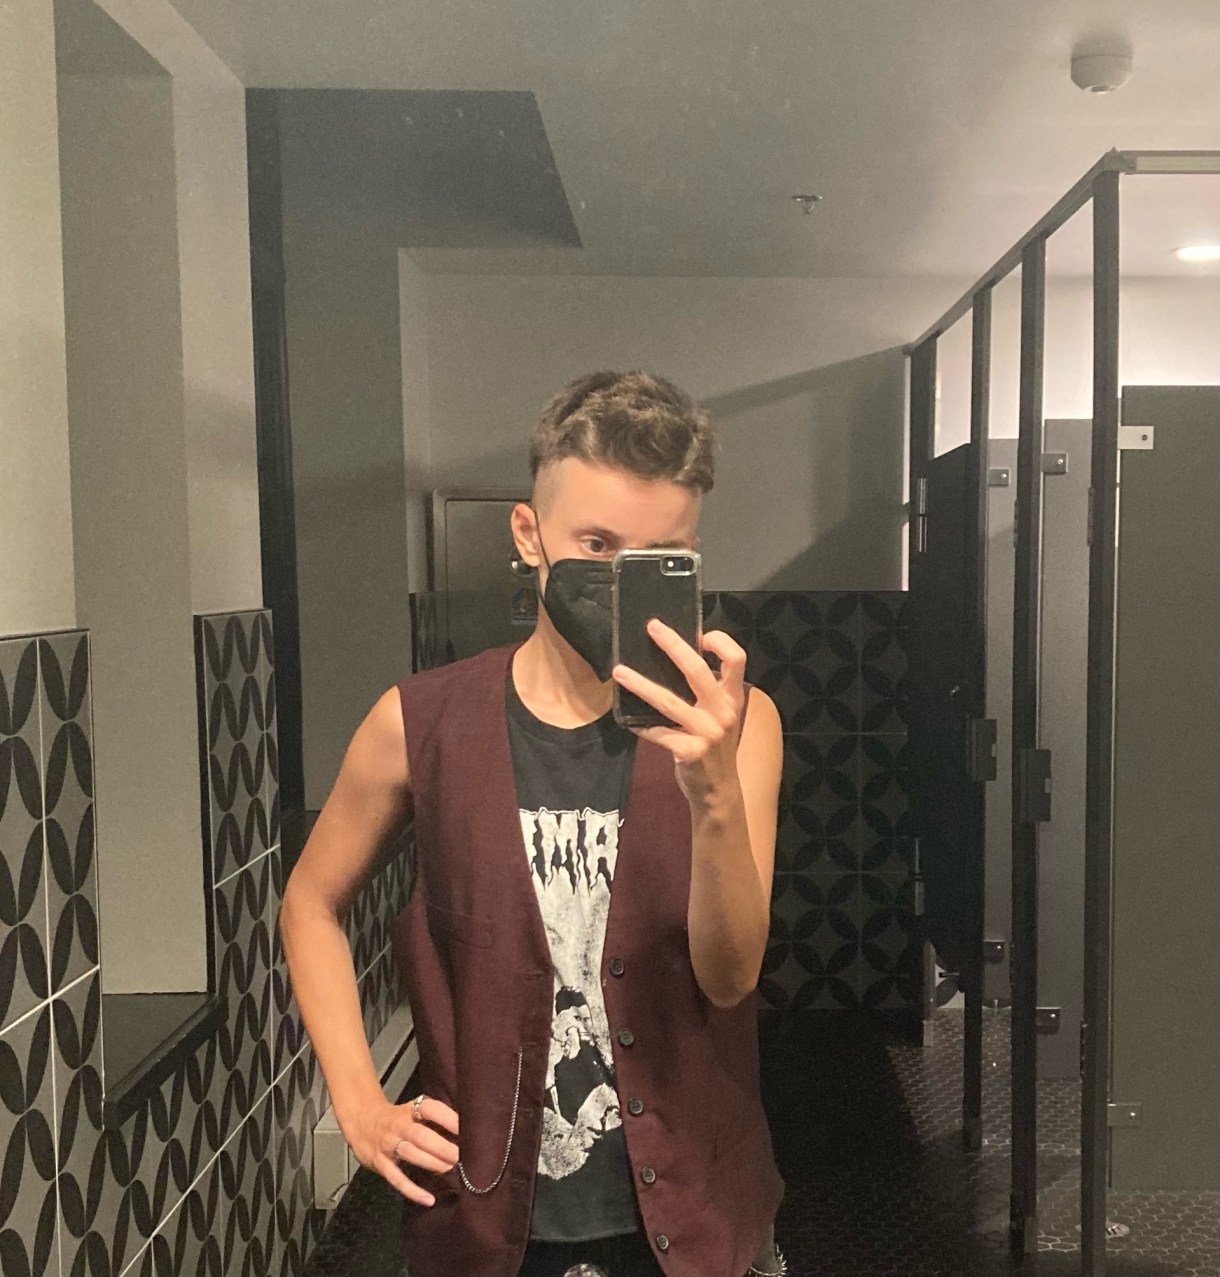 ro a white human stands in a bathroom and takes a mirror selfie, hand on their hip. they have short brown hair, and are wearing a mask, maroon vest and some kind of muscle tee underneath